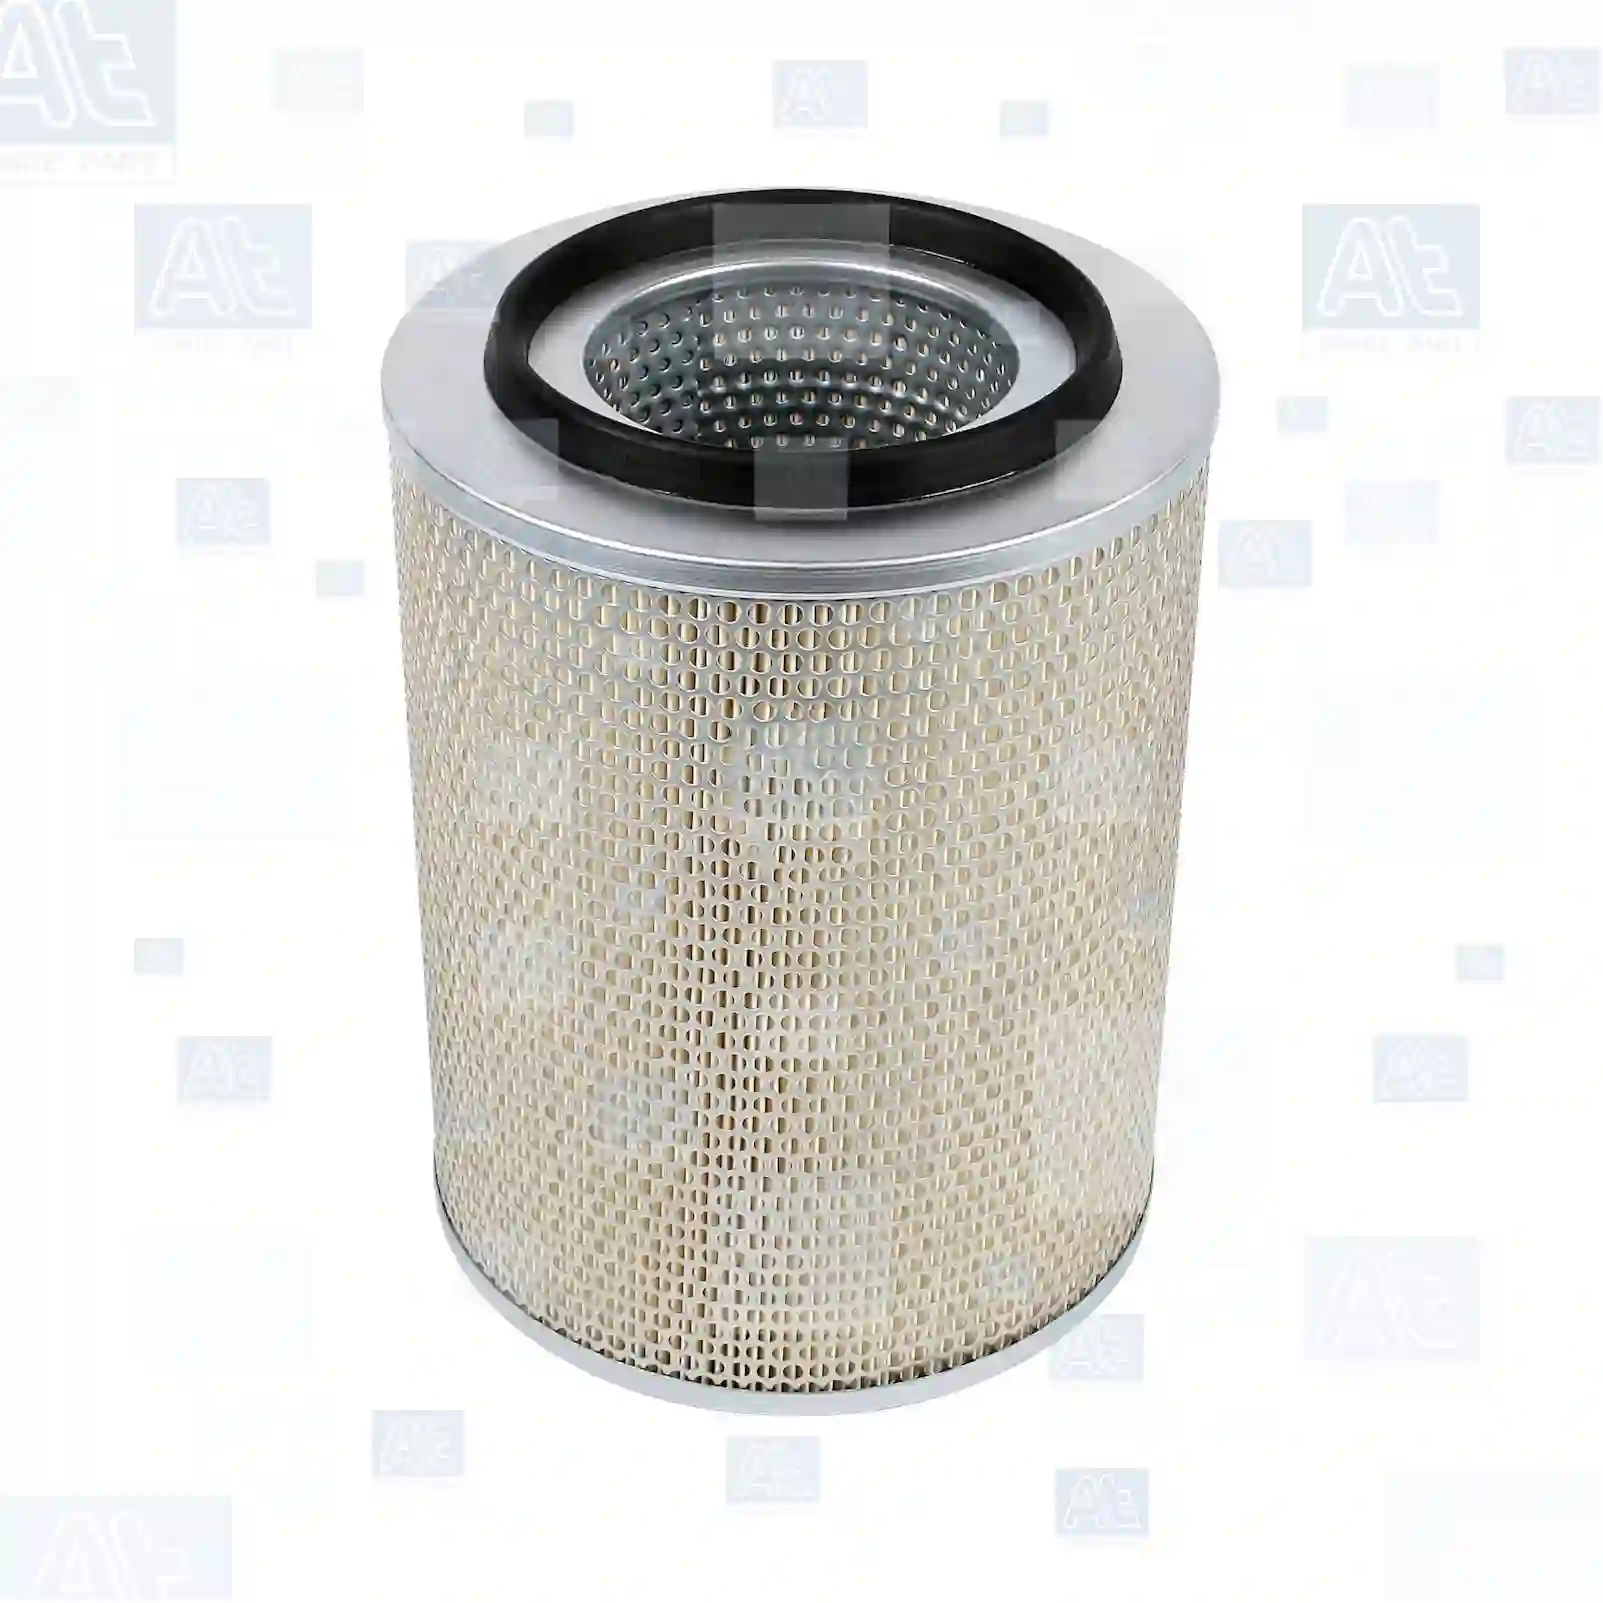 Air filter, 77706741, 01902120, 02168629, 02408868, 02411527, 02508228, 02508238, 02912007, 02914182, 01902120, 01902128, 02508228, 02508238, 02912007, 02914182, 5011326, 5011557, 9974142, 9974142, 01902120, 01902128, 02168629, 101902128, 1902120, 1902128, 2168629, 02168629, 02408868, 02508228, 02508238, 02912007, 02914182, CH12248 ||  77706741 At Spare Part | Engine, Accelerator Pedal, Camshaft, Connecting Rod, Crankcase, Crankshaft, Cylinder Head, Engine Suspension Mountings, Exhaust Manifold, Exhaust Gas Recirculation, Filter Kits, Flywheel Housing, General Overhaul Kits, Engine, Intake Manifold, Oil Cleaner, Oil Cooler, Oil Filter, Oil Pump, Oil Sump, Piston & Liner, Sensor & Switch, Timing Case, Turbocharger, Cooling System, Belt Tensioner, Coolant Filter, Coolant Pipe, Corrosion Prevention Agent, Drive, Expansion Tank, Fan, Intercooler, Monitors & Gauges, Radiator, Thermostat, V-Belt / Timing belt, Water Pump, Fuel System, Electronical Injector Unit, Feed Pump, Fuel Filter, cpl., Fuel Gauge Sender,  Fuel Line, Fuel Pump, Fuel Tank, Injection Line Kit, Injection Pump, Exhaust System, Clutch & Pedal, Gearbox, Propeller Shaft, Axles, Brake System, Hubs & Wheels, Suspension, Leaf Spring, Universal Parts / Accessories, Steering, Electrical System, Cabin Air filter, 77706741, 01902120, 02168629, 02408868, 02411527, 02508228, 02508238, 02912007, 02914182, 01902120, 01902128, 02508228, 02508238, 02912007, 02914182, 5011326, 5011557, 9974142, 9974142, 01902120, 01902128, 02168629, 101902128, 1902120, 1902128, 2168629, 02168629, 02408868, 02508228, 02508238, 02912007, 02914182, CH12248 ||  77706741 At Spare Part | Engine, Accelerator Pedal, Camshaft, Connecting Rod, Crankcase, Crankshaft, Cylinder Head, Engine Suspension Mountings, Exhaust Manifold, Exhaust Gas Recirculation, Filter Kits, Flywheel Housing, General Overhaul Kits, Engine, Intake Manifold, Oil Cleaner, Oil Cooler, Oil Filter, Oil Pump, Oil Sump, Piston & Liner, Sensor & Switch, Timing Case, Turbocharger, Cooling System, Belt Tensioner, Coolant Filter, Coolant Pipe, Corrosion Prevention Agent, Drive, Expansion Tank, Fan, Intercooler, Monitors & Gauges, Radiator, Thermostat, V-Belt / Timing belt, Water Pump, Fuel System, Electronical Injector Unit, Feed Pump, Fuel Filter, cpl., Fuel Gauge Sender,  Fuel Line, Fuel Pump, Fuel Tank, Injection Line Kit, Injection Pump, Exhaust System, Clutch & Pedal, Gearbox, Propeller Shaft, Axles, Brake System, Hubs & Wheels, Suspension, Leaf Spring, Universal Parts / Accessories, Steering, Electrical System, Cabin